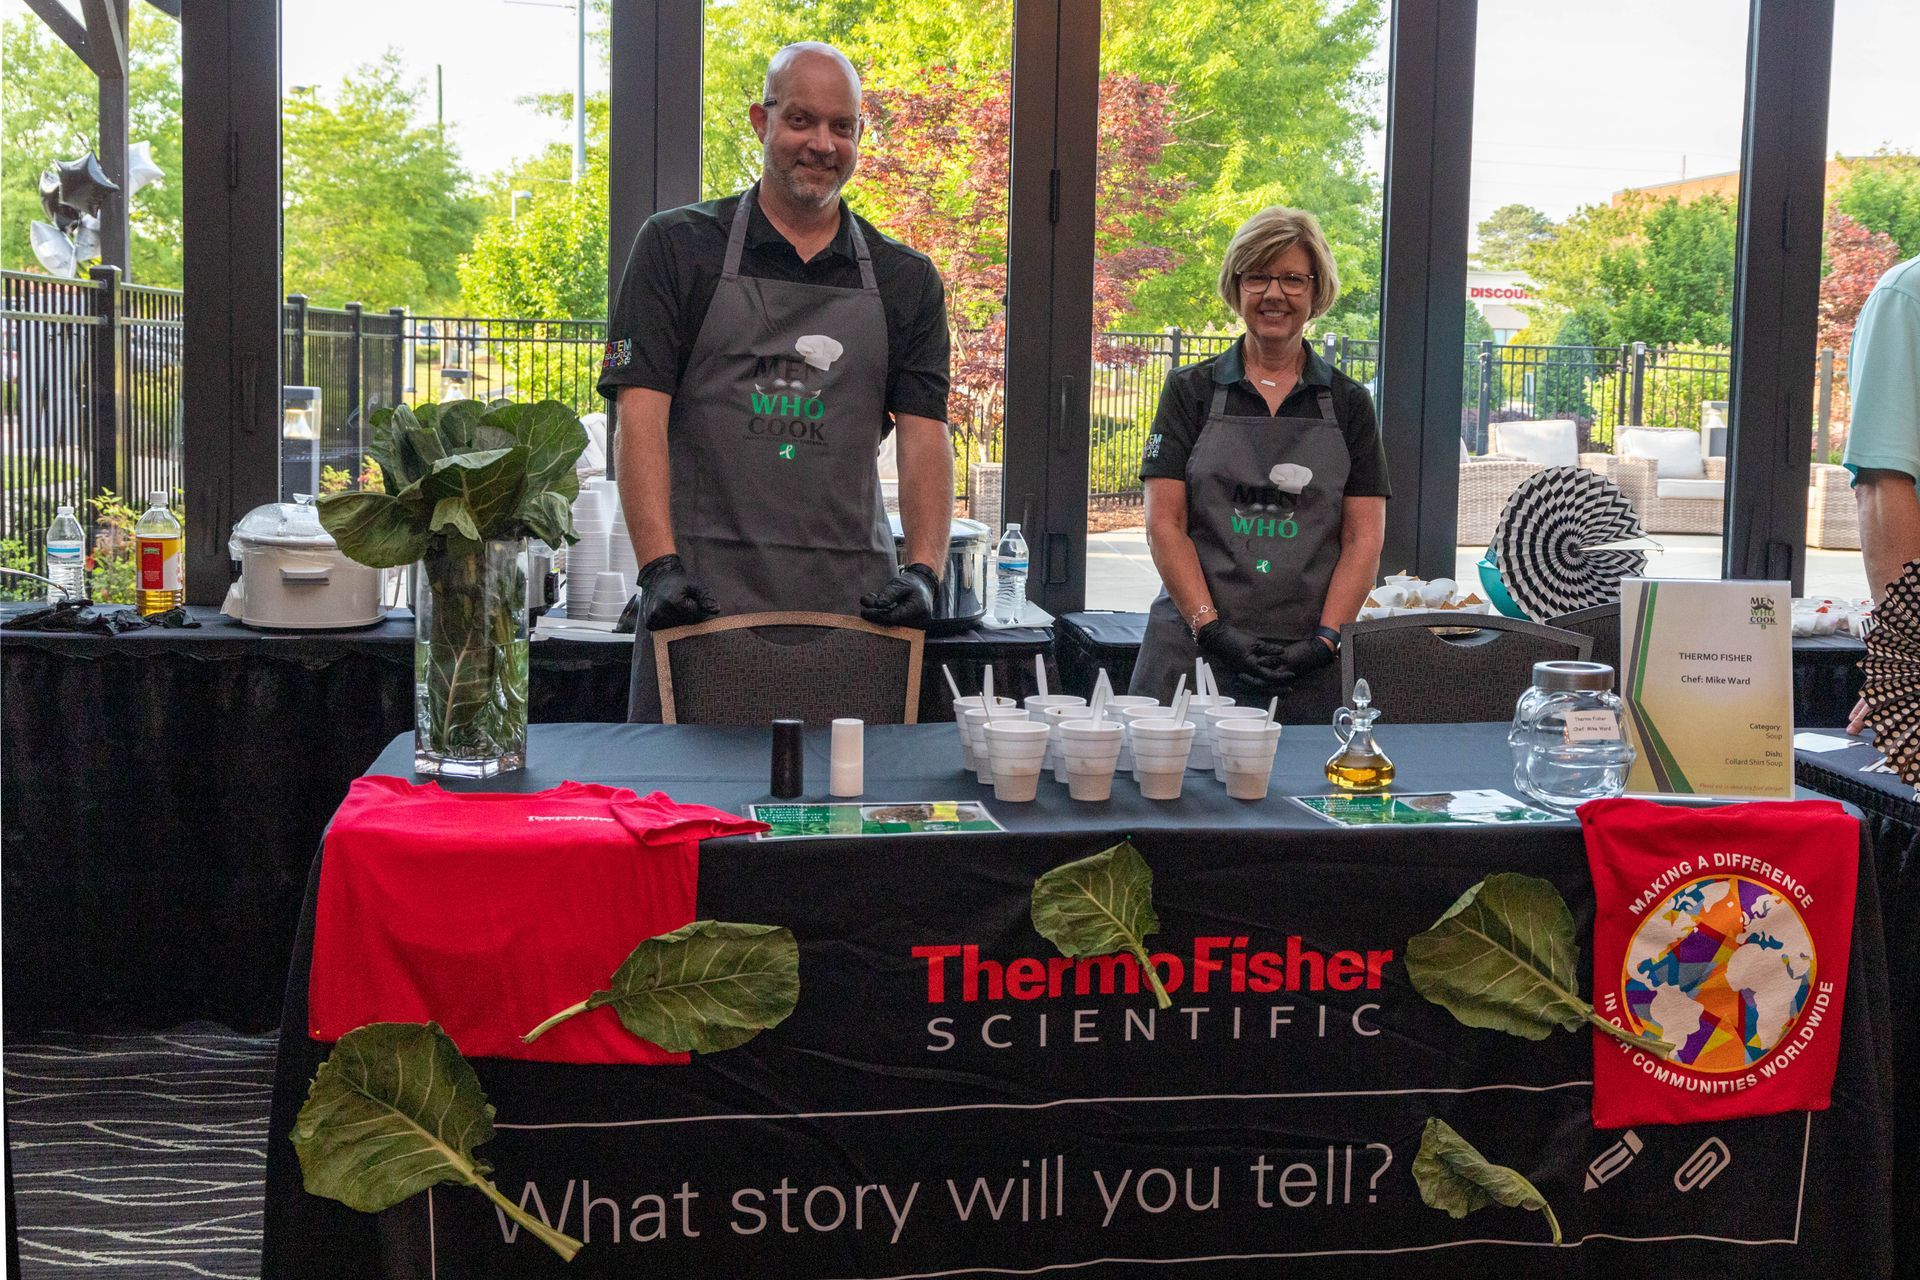 two people standing behind a table that says thermo fisher scientific